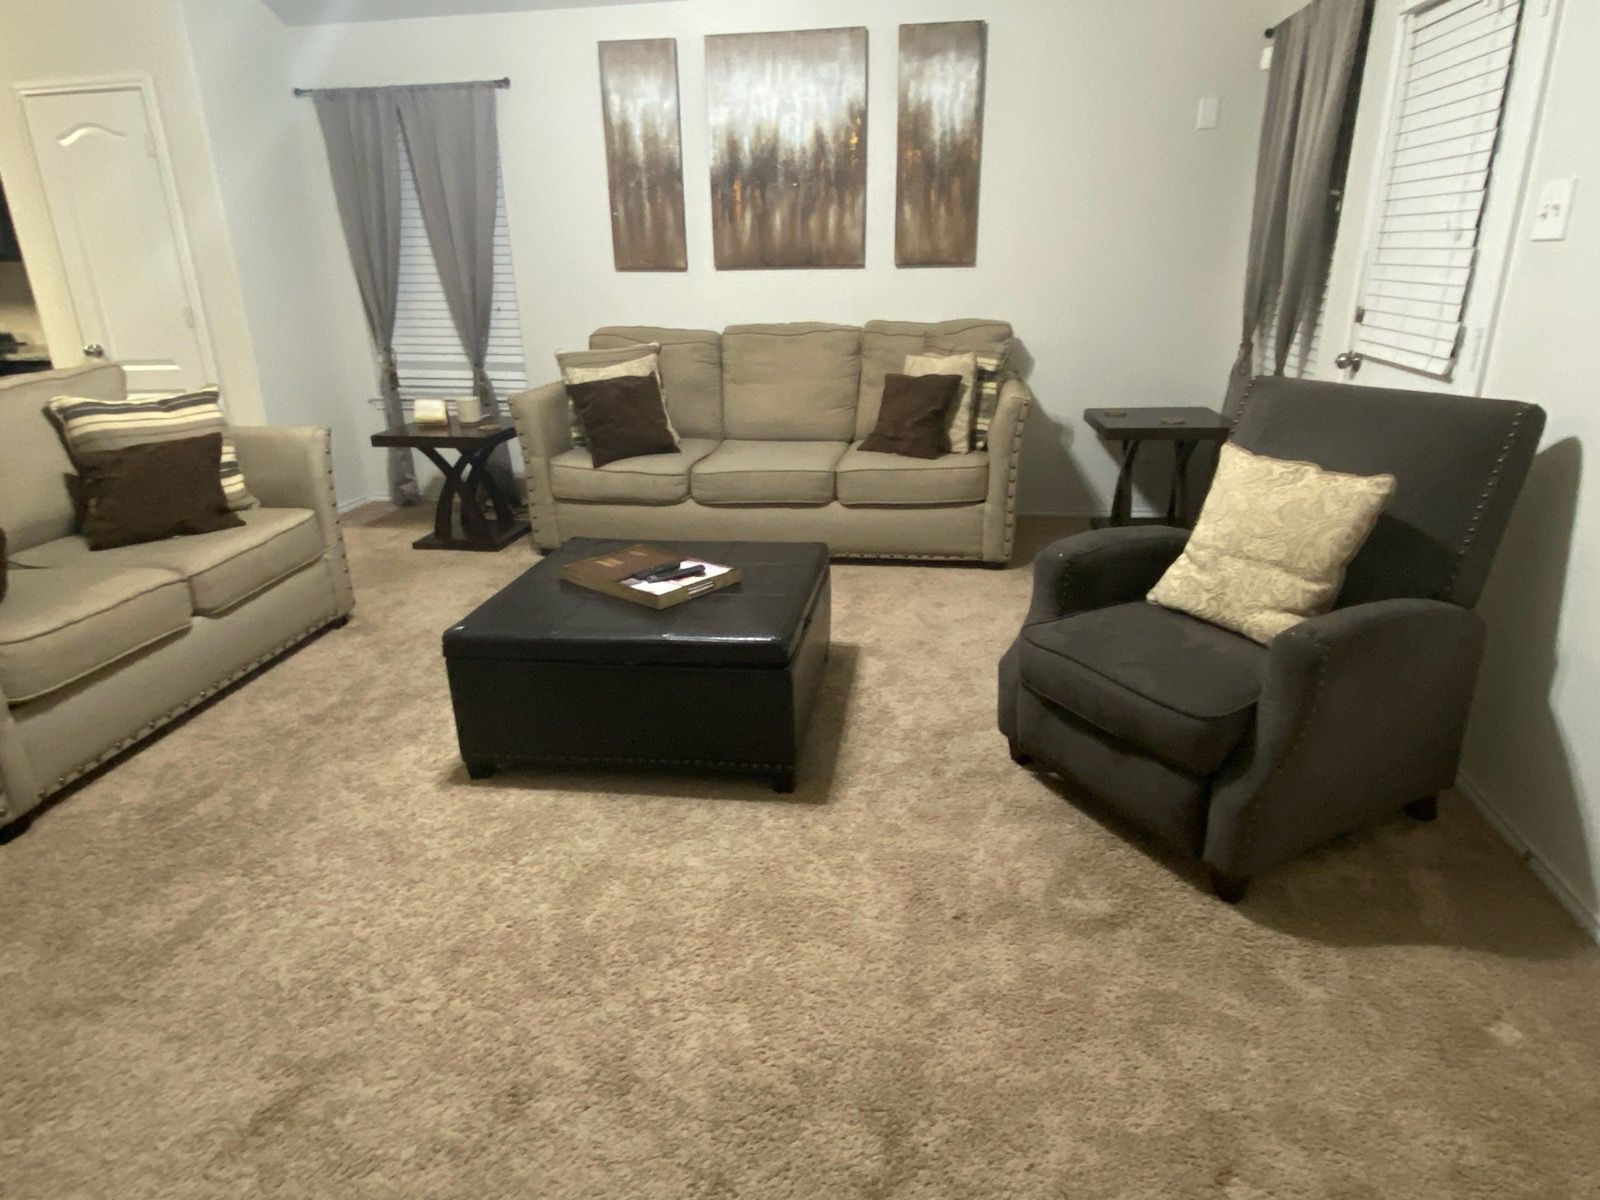 Sofa, loveseat, And Accent Pillows